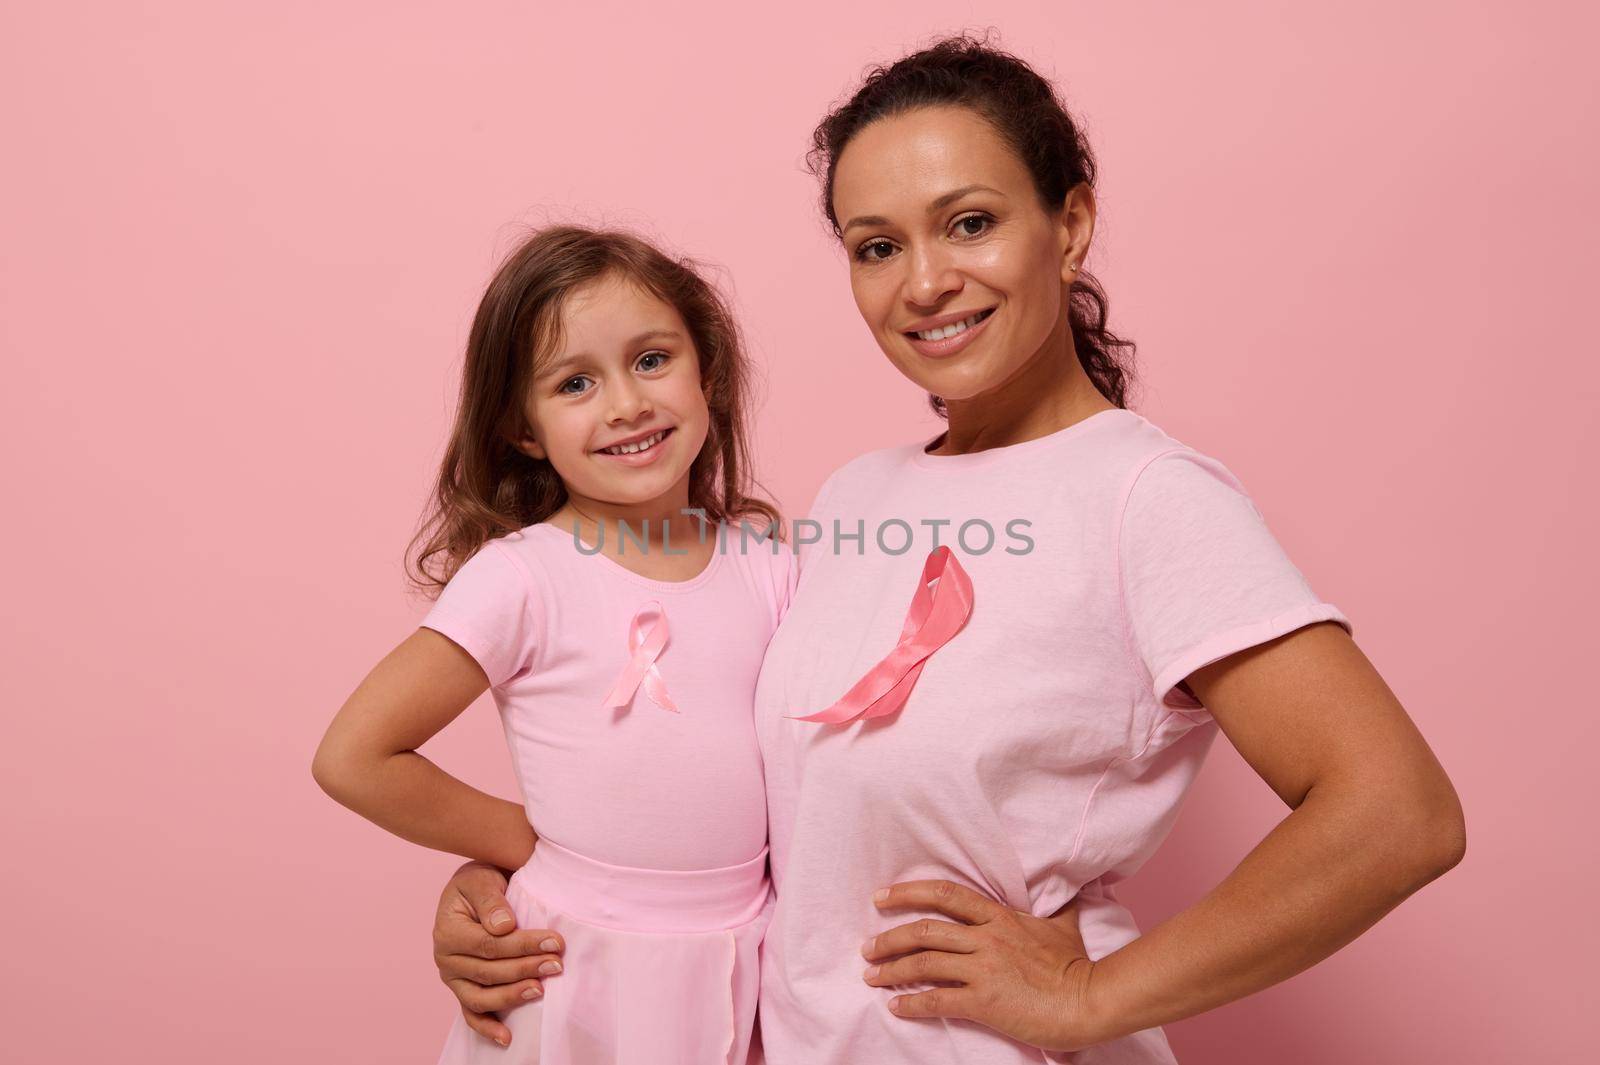 Isolated portrait on colored background with copy space of mixed race woman hugging her daughter, wearing pink clothes and breast cancer awareness ribbon showing solidarity with cancer survivors